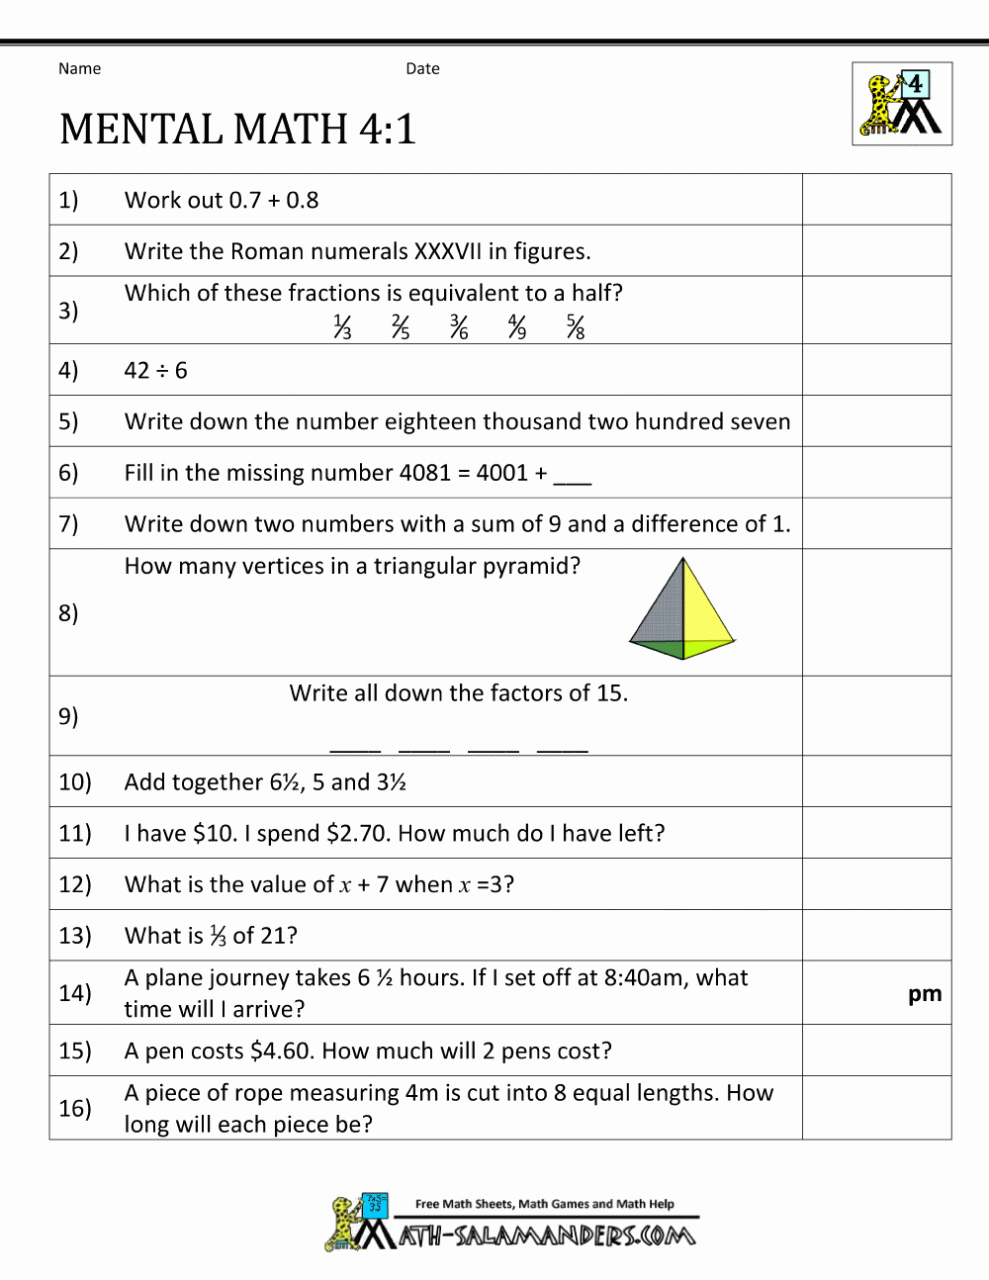 Mental Maths For Class 4 With Answers